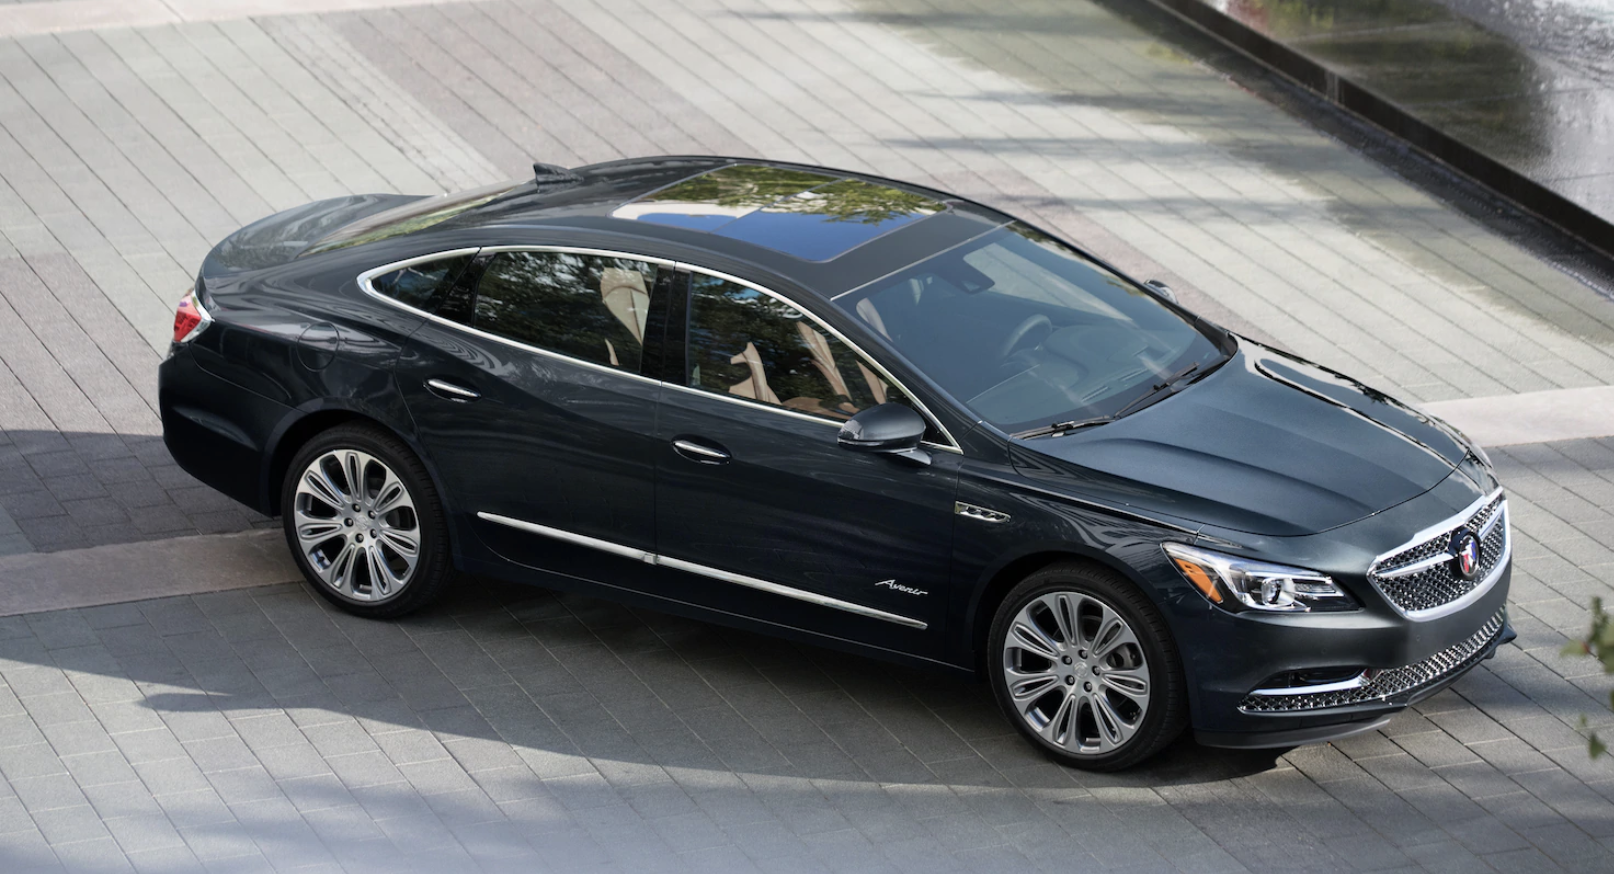 Why Buy a 2019 Buick LaCrosse?